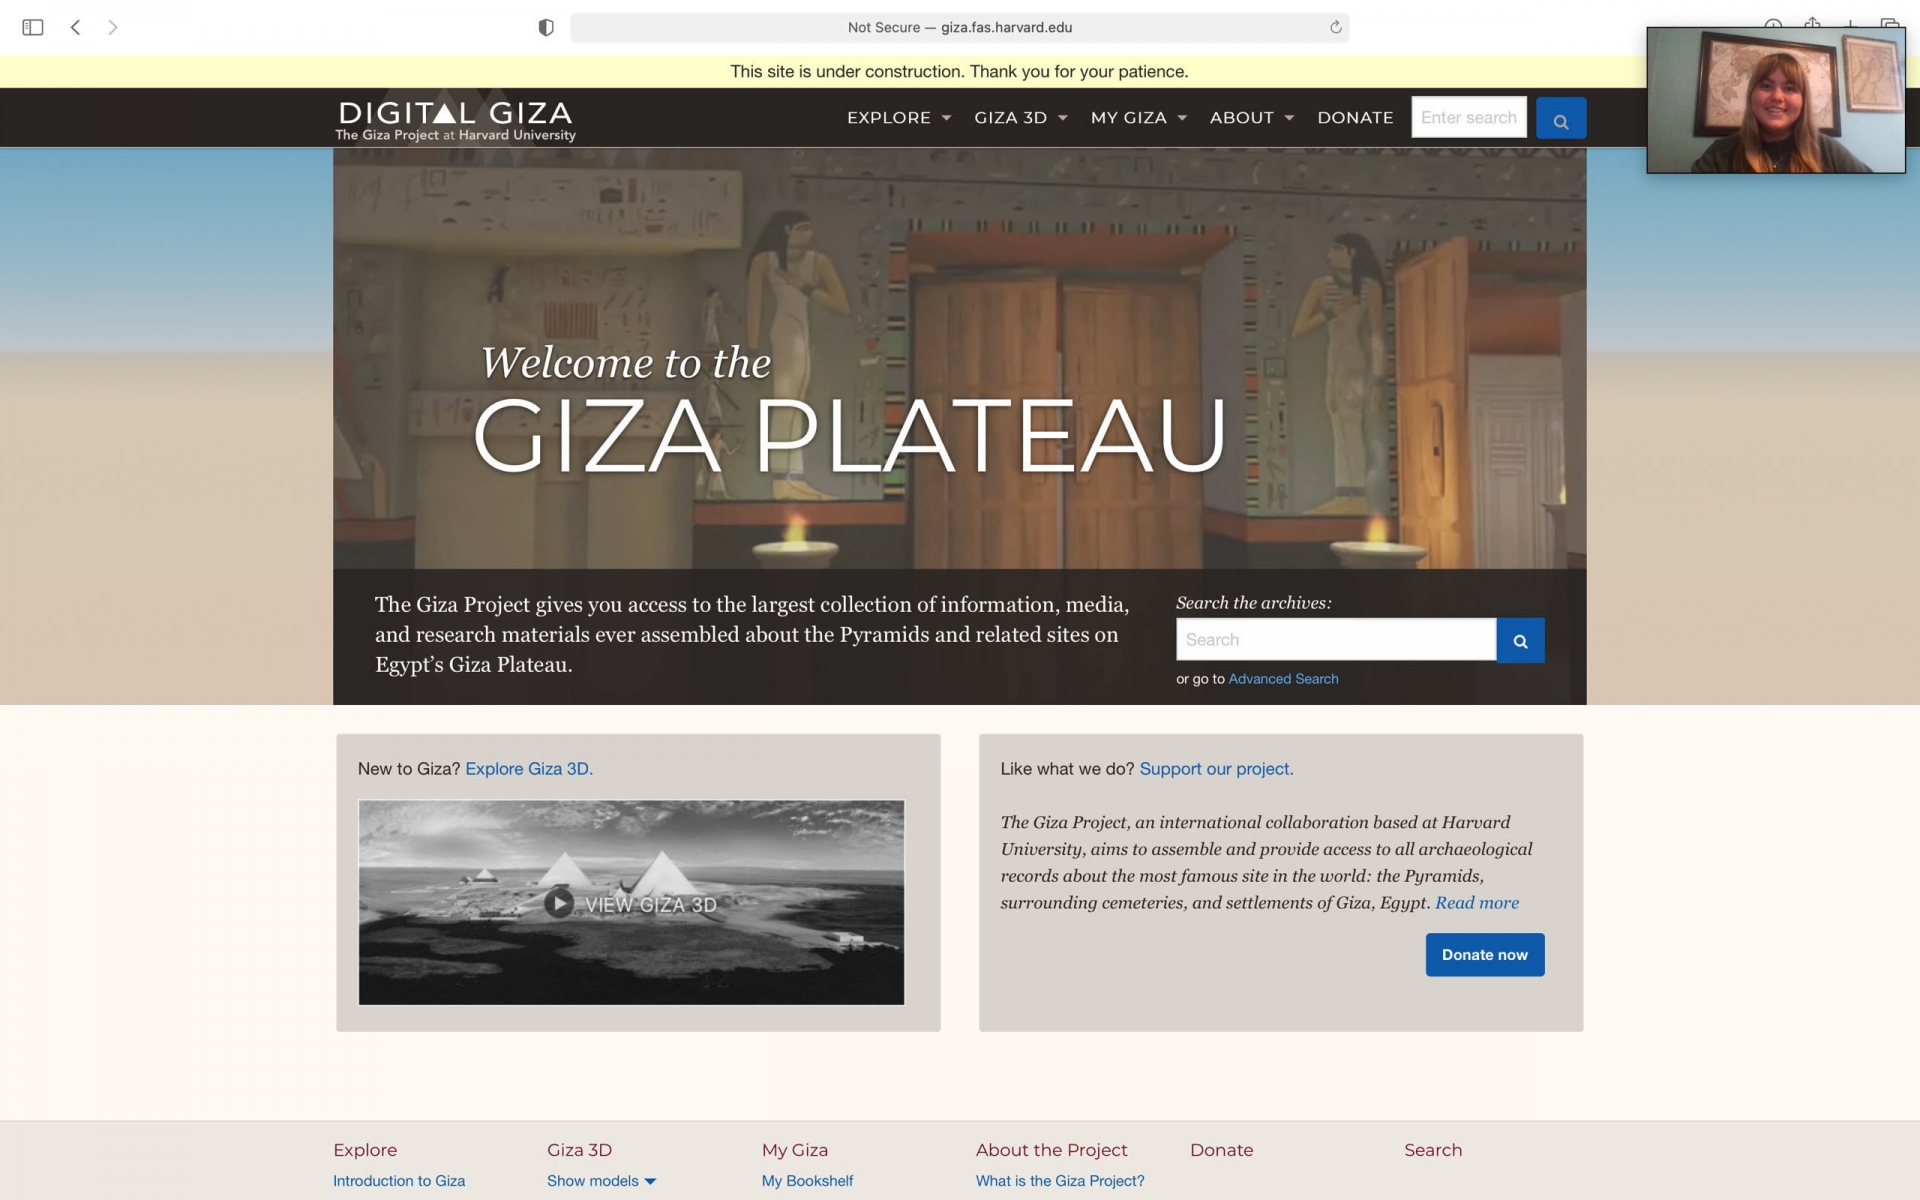 Screen shot of the Digital Giza Project website.